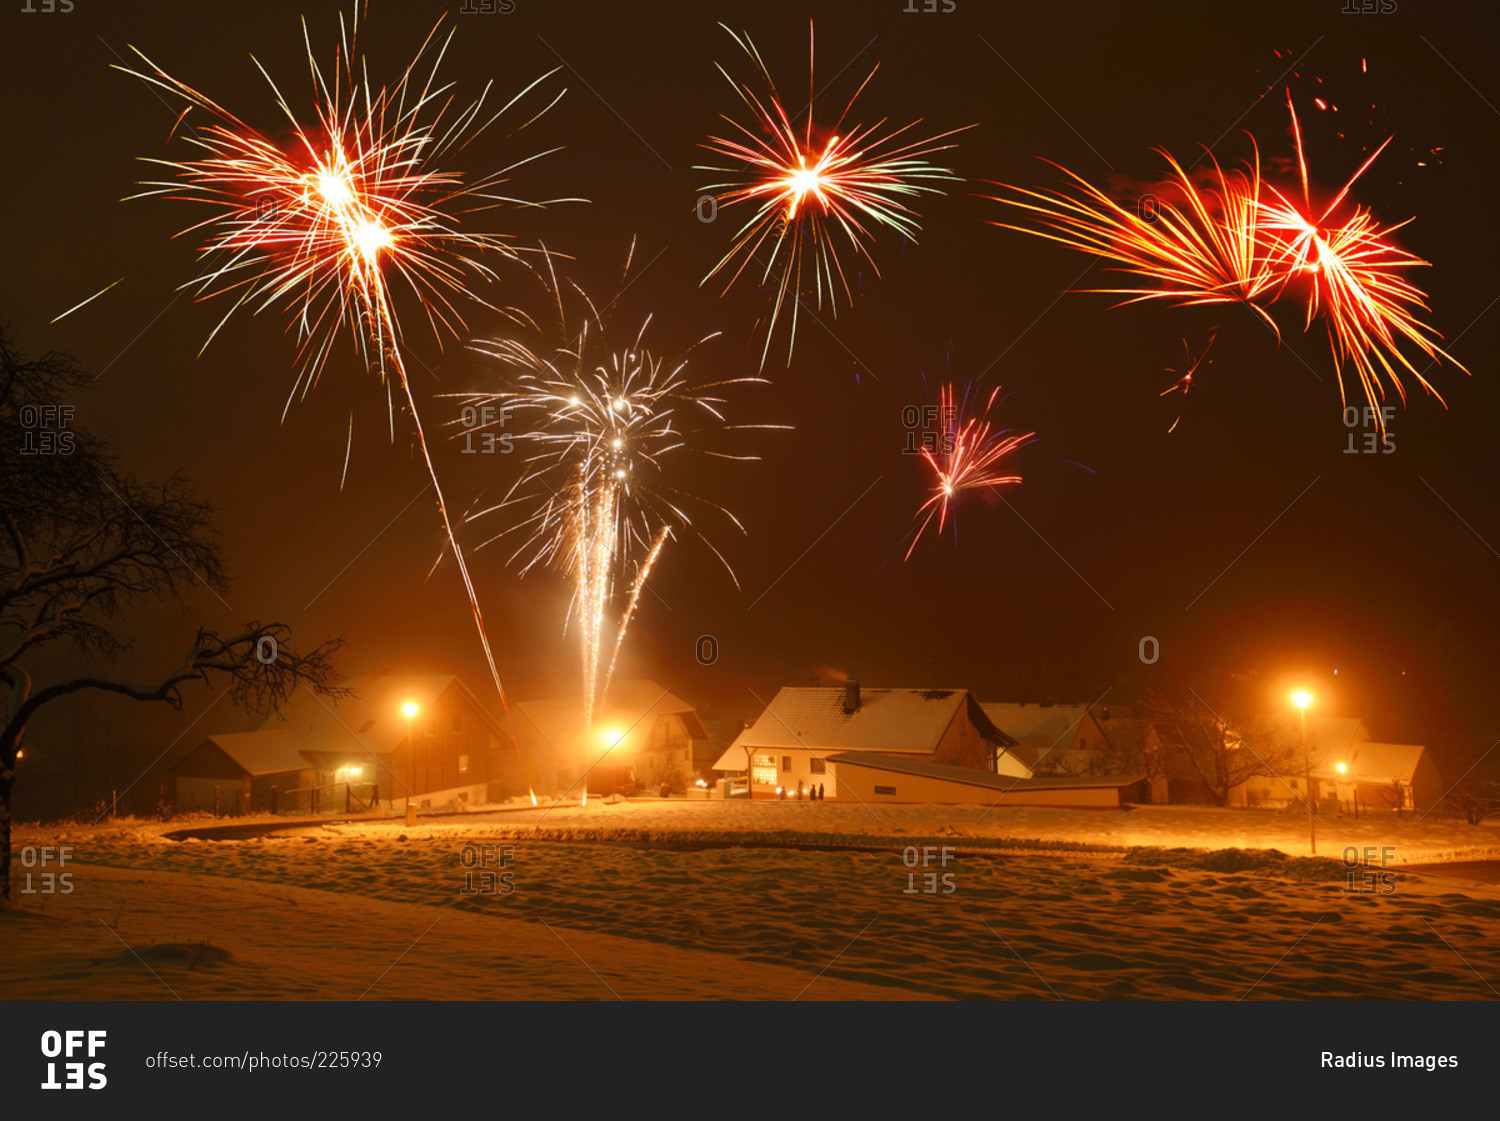 Celebrating new year's eve with fireworks in village